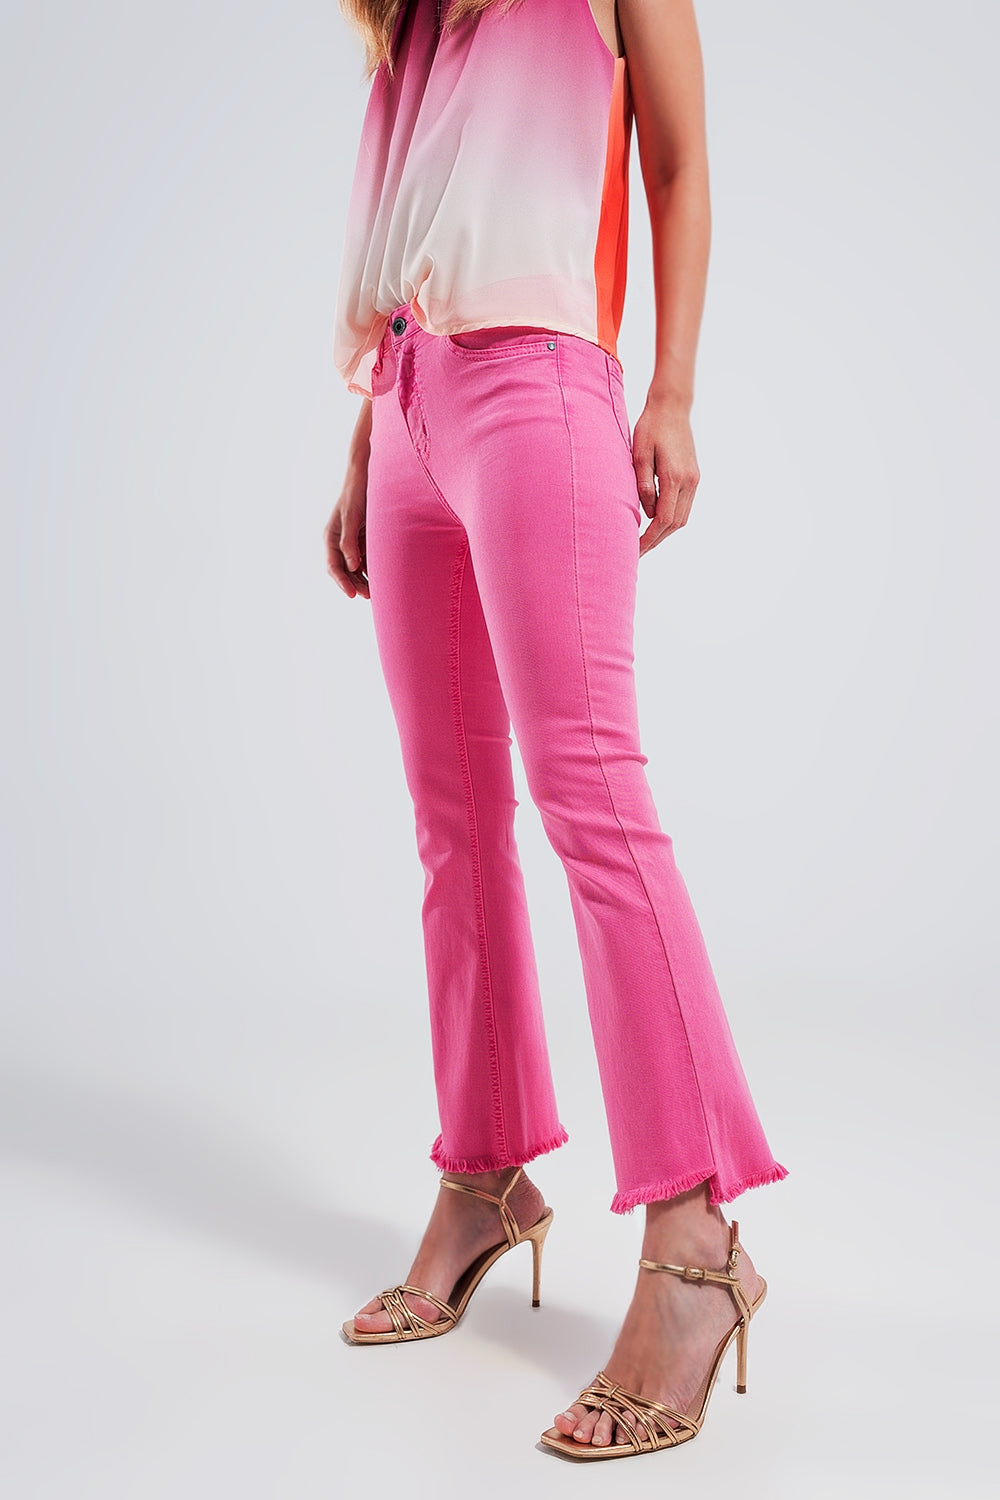 Straight Pants in fuchsia with wide ankles